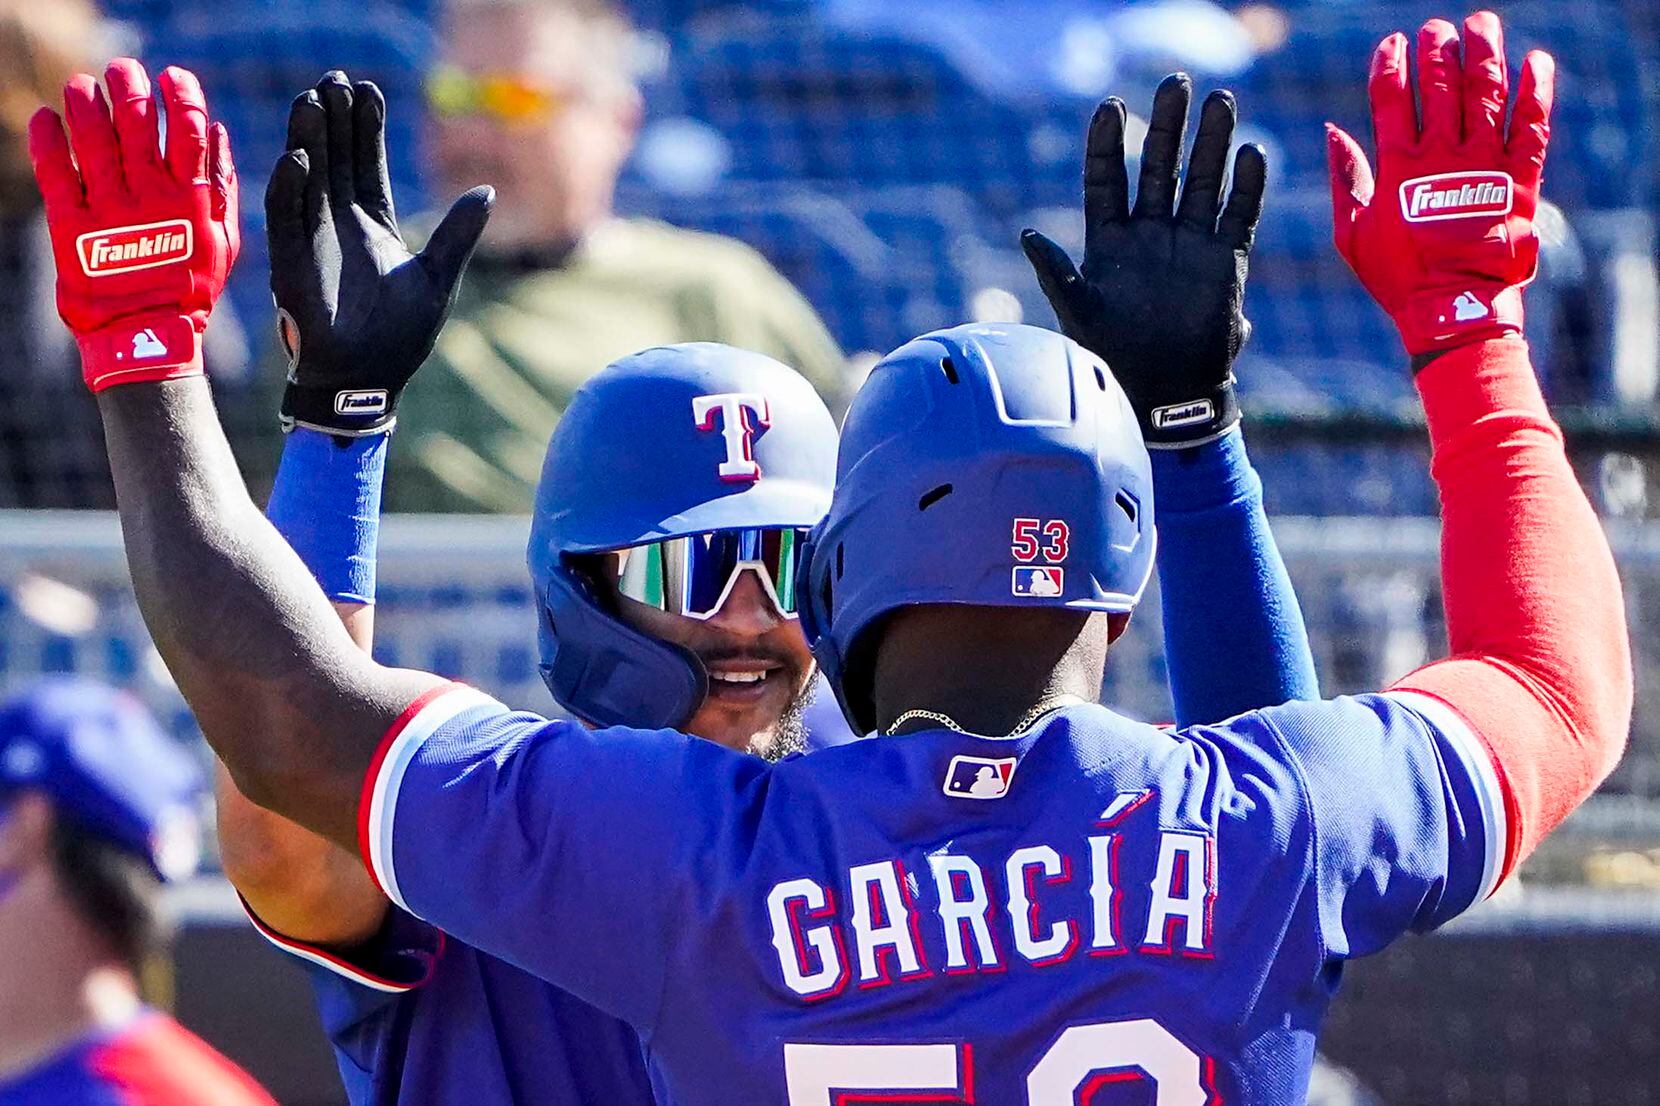 Texas Rangers infielder Anderson Tejeda (facing) celebrates with outfielder Adolis García after Garcia drove in Tejada with a 2-run home run during the fifth inning of a spring training game against the Seattle Mariners at Peoria Sports Complex on Wednesday, March 10, 2021, in Peoria, Ariz.